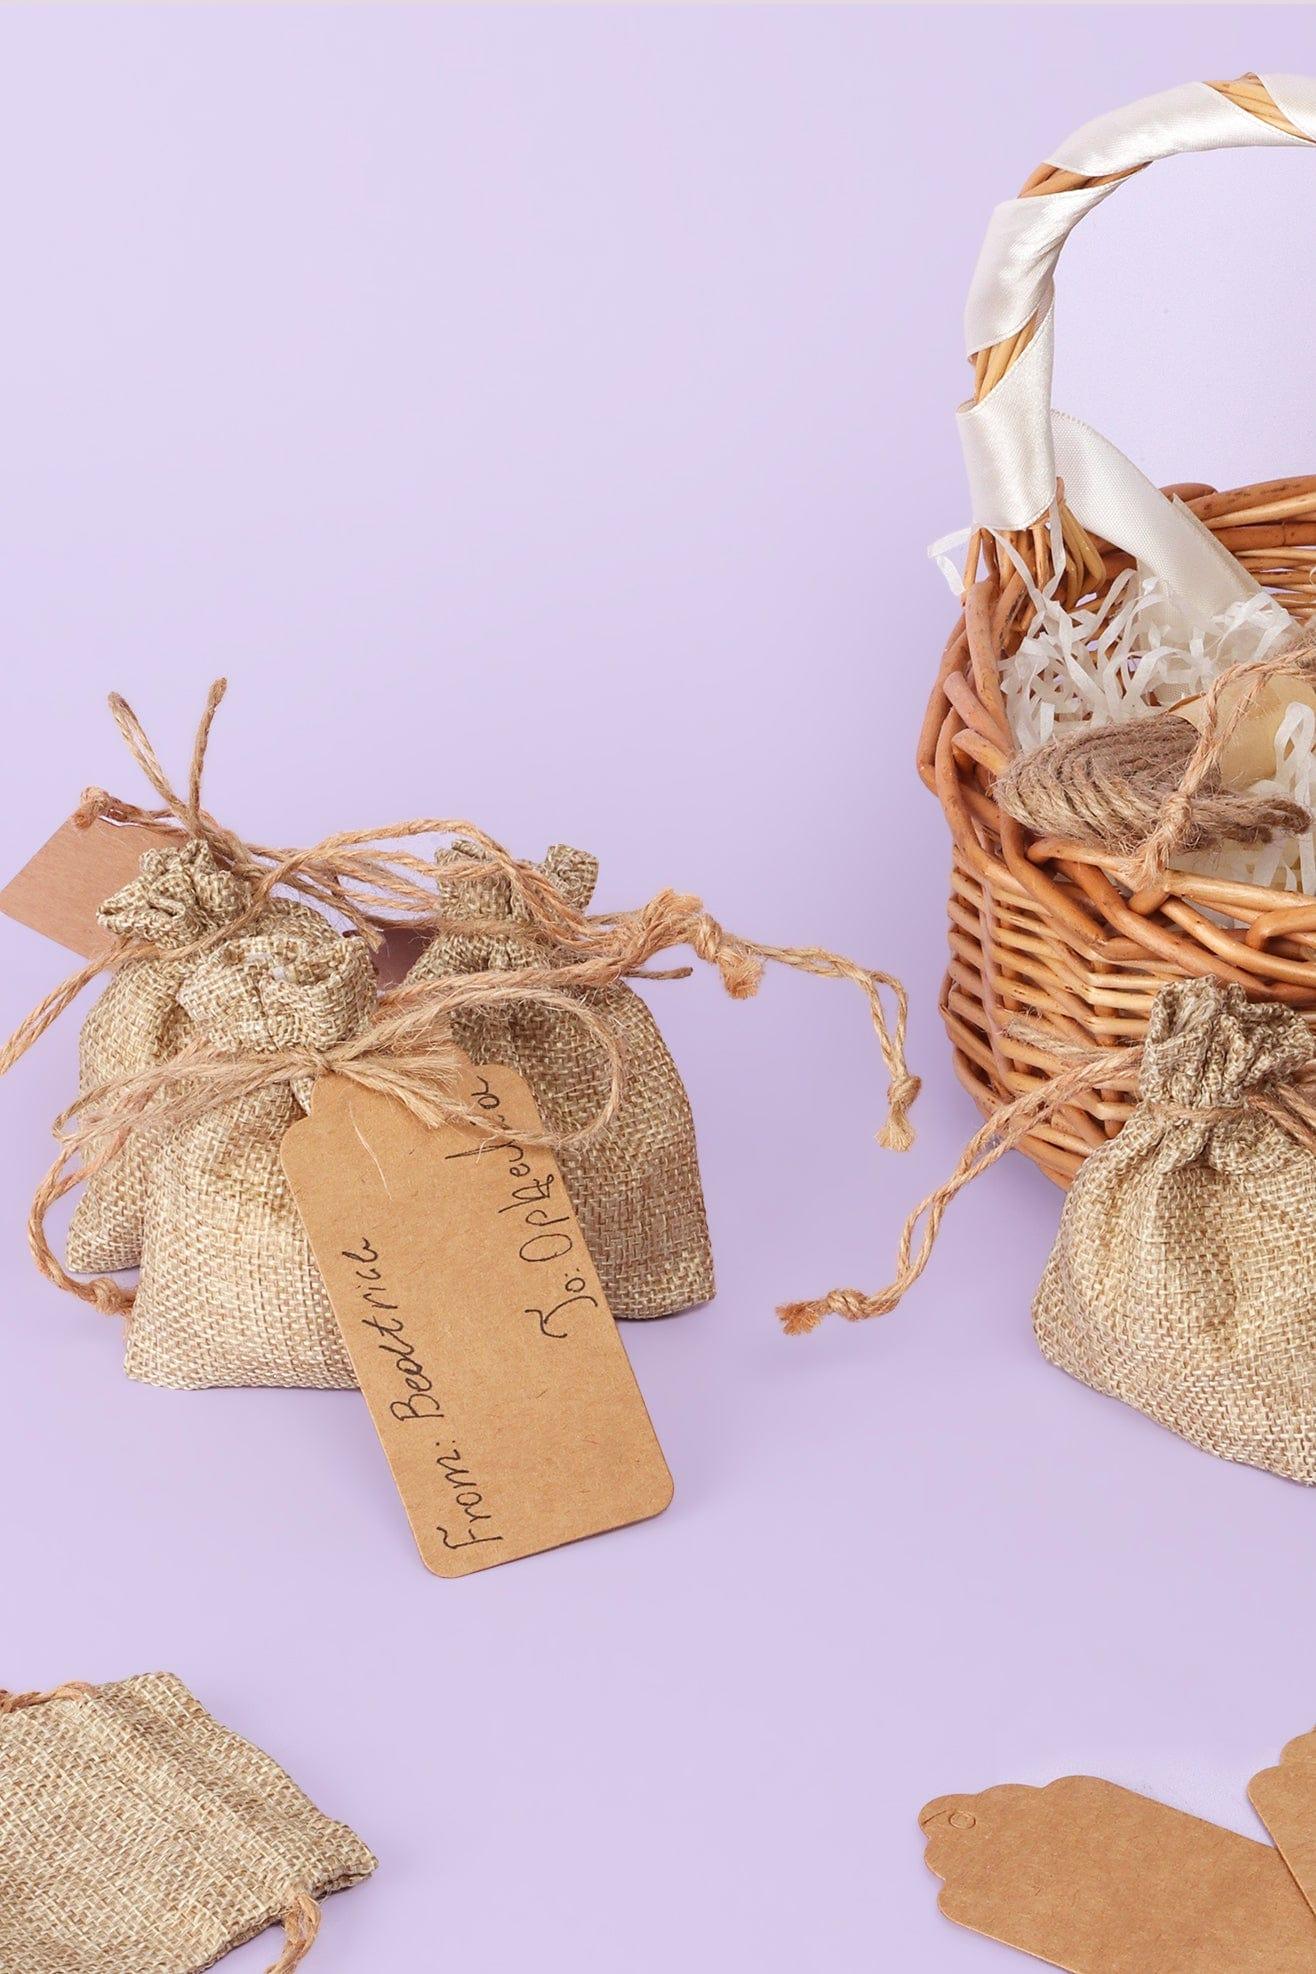 G Decor Gift Bags Brown Set of 30 Small Hessian Gift Bags with Tags